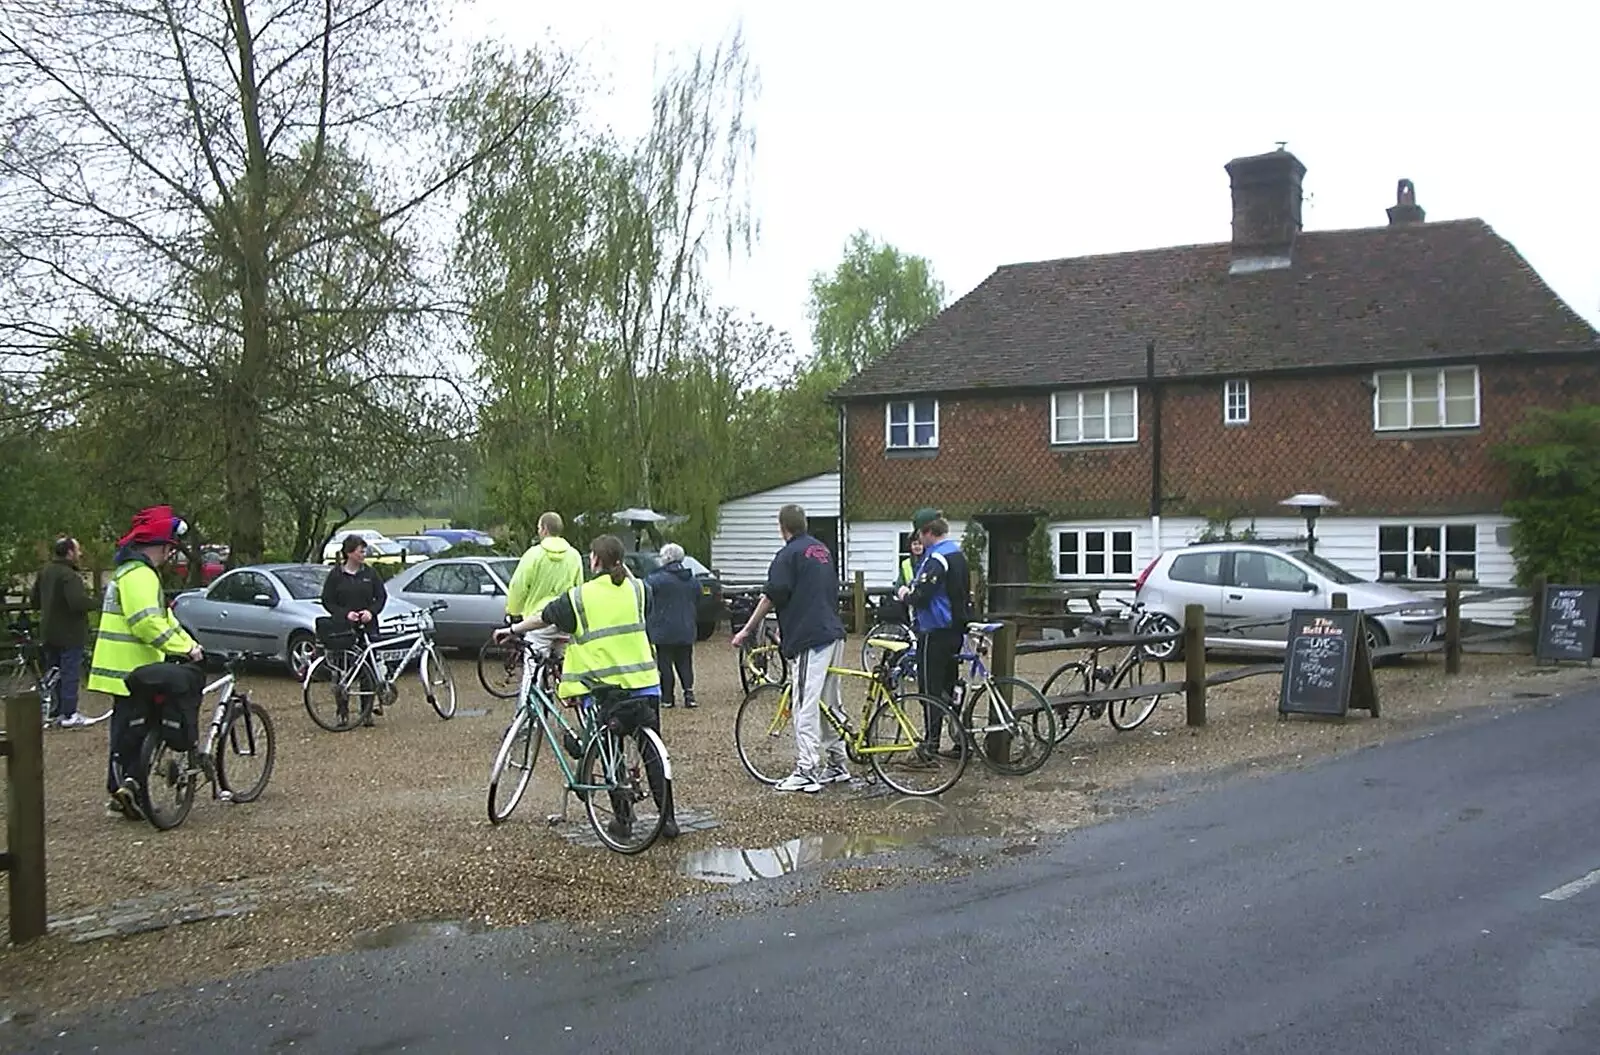 Bikes in the car park of the Bell, Smarden, from The BSCC Annual Bike Ride, Lenham, Kent - 8th May 2004